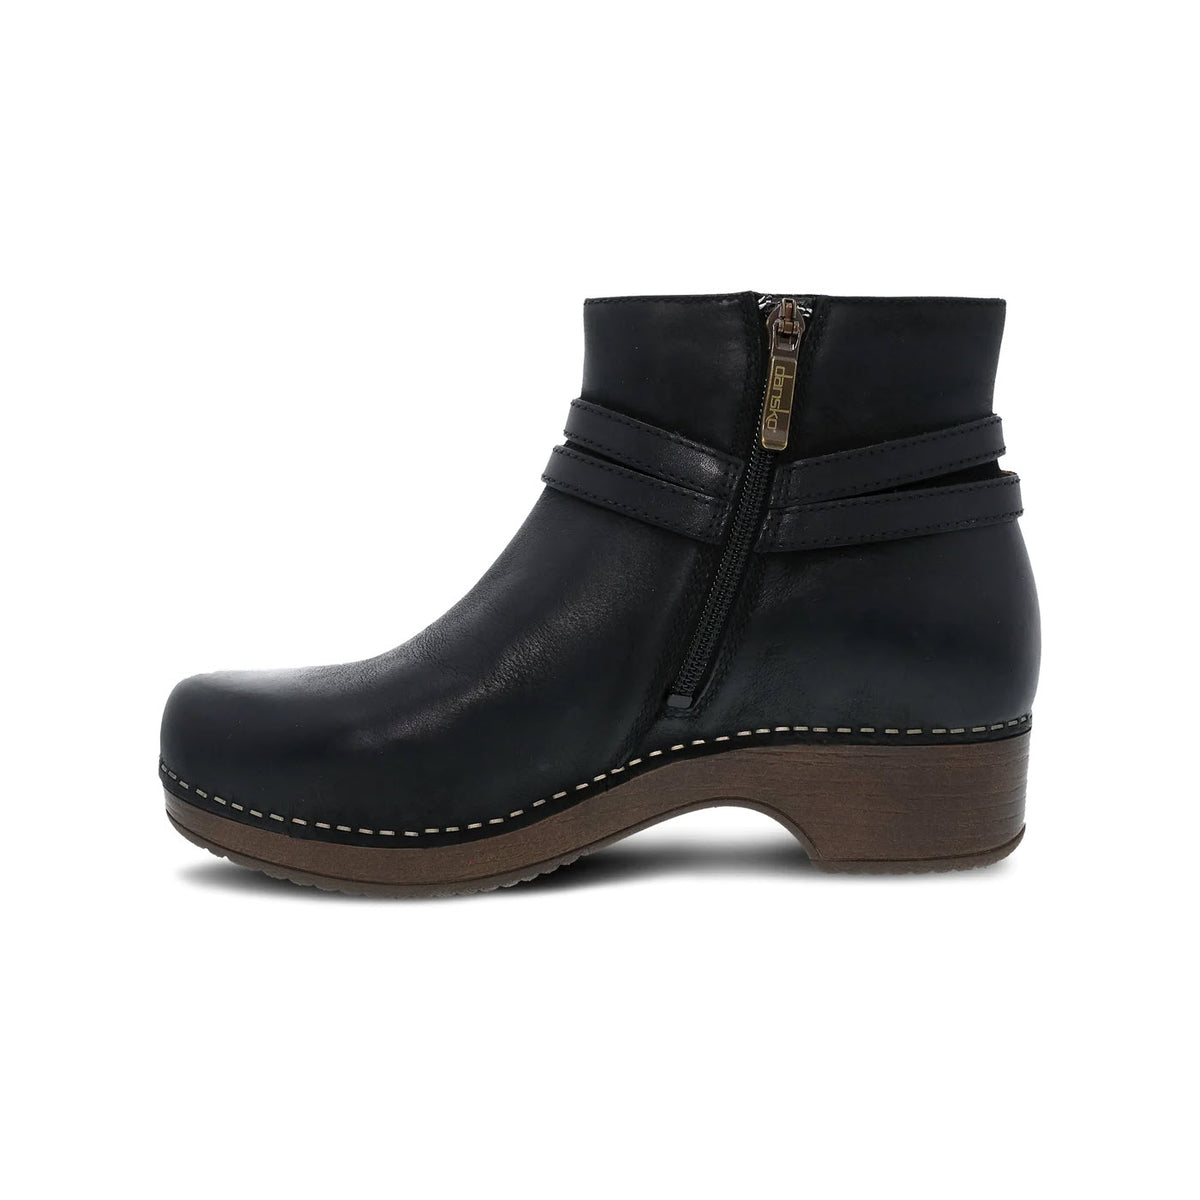 Dansko black leather ankle bootie with a side zipper and a wooden block heel, featuring patented stapled construction, isolated on a white background.